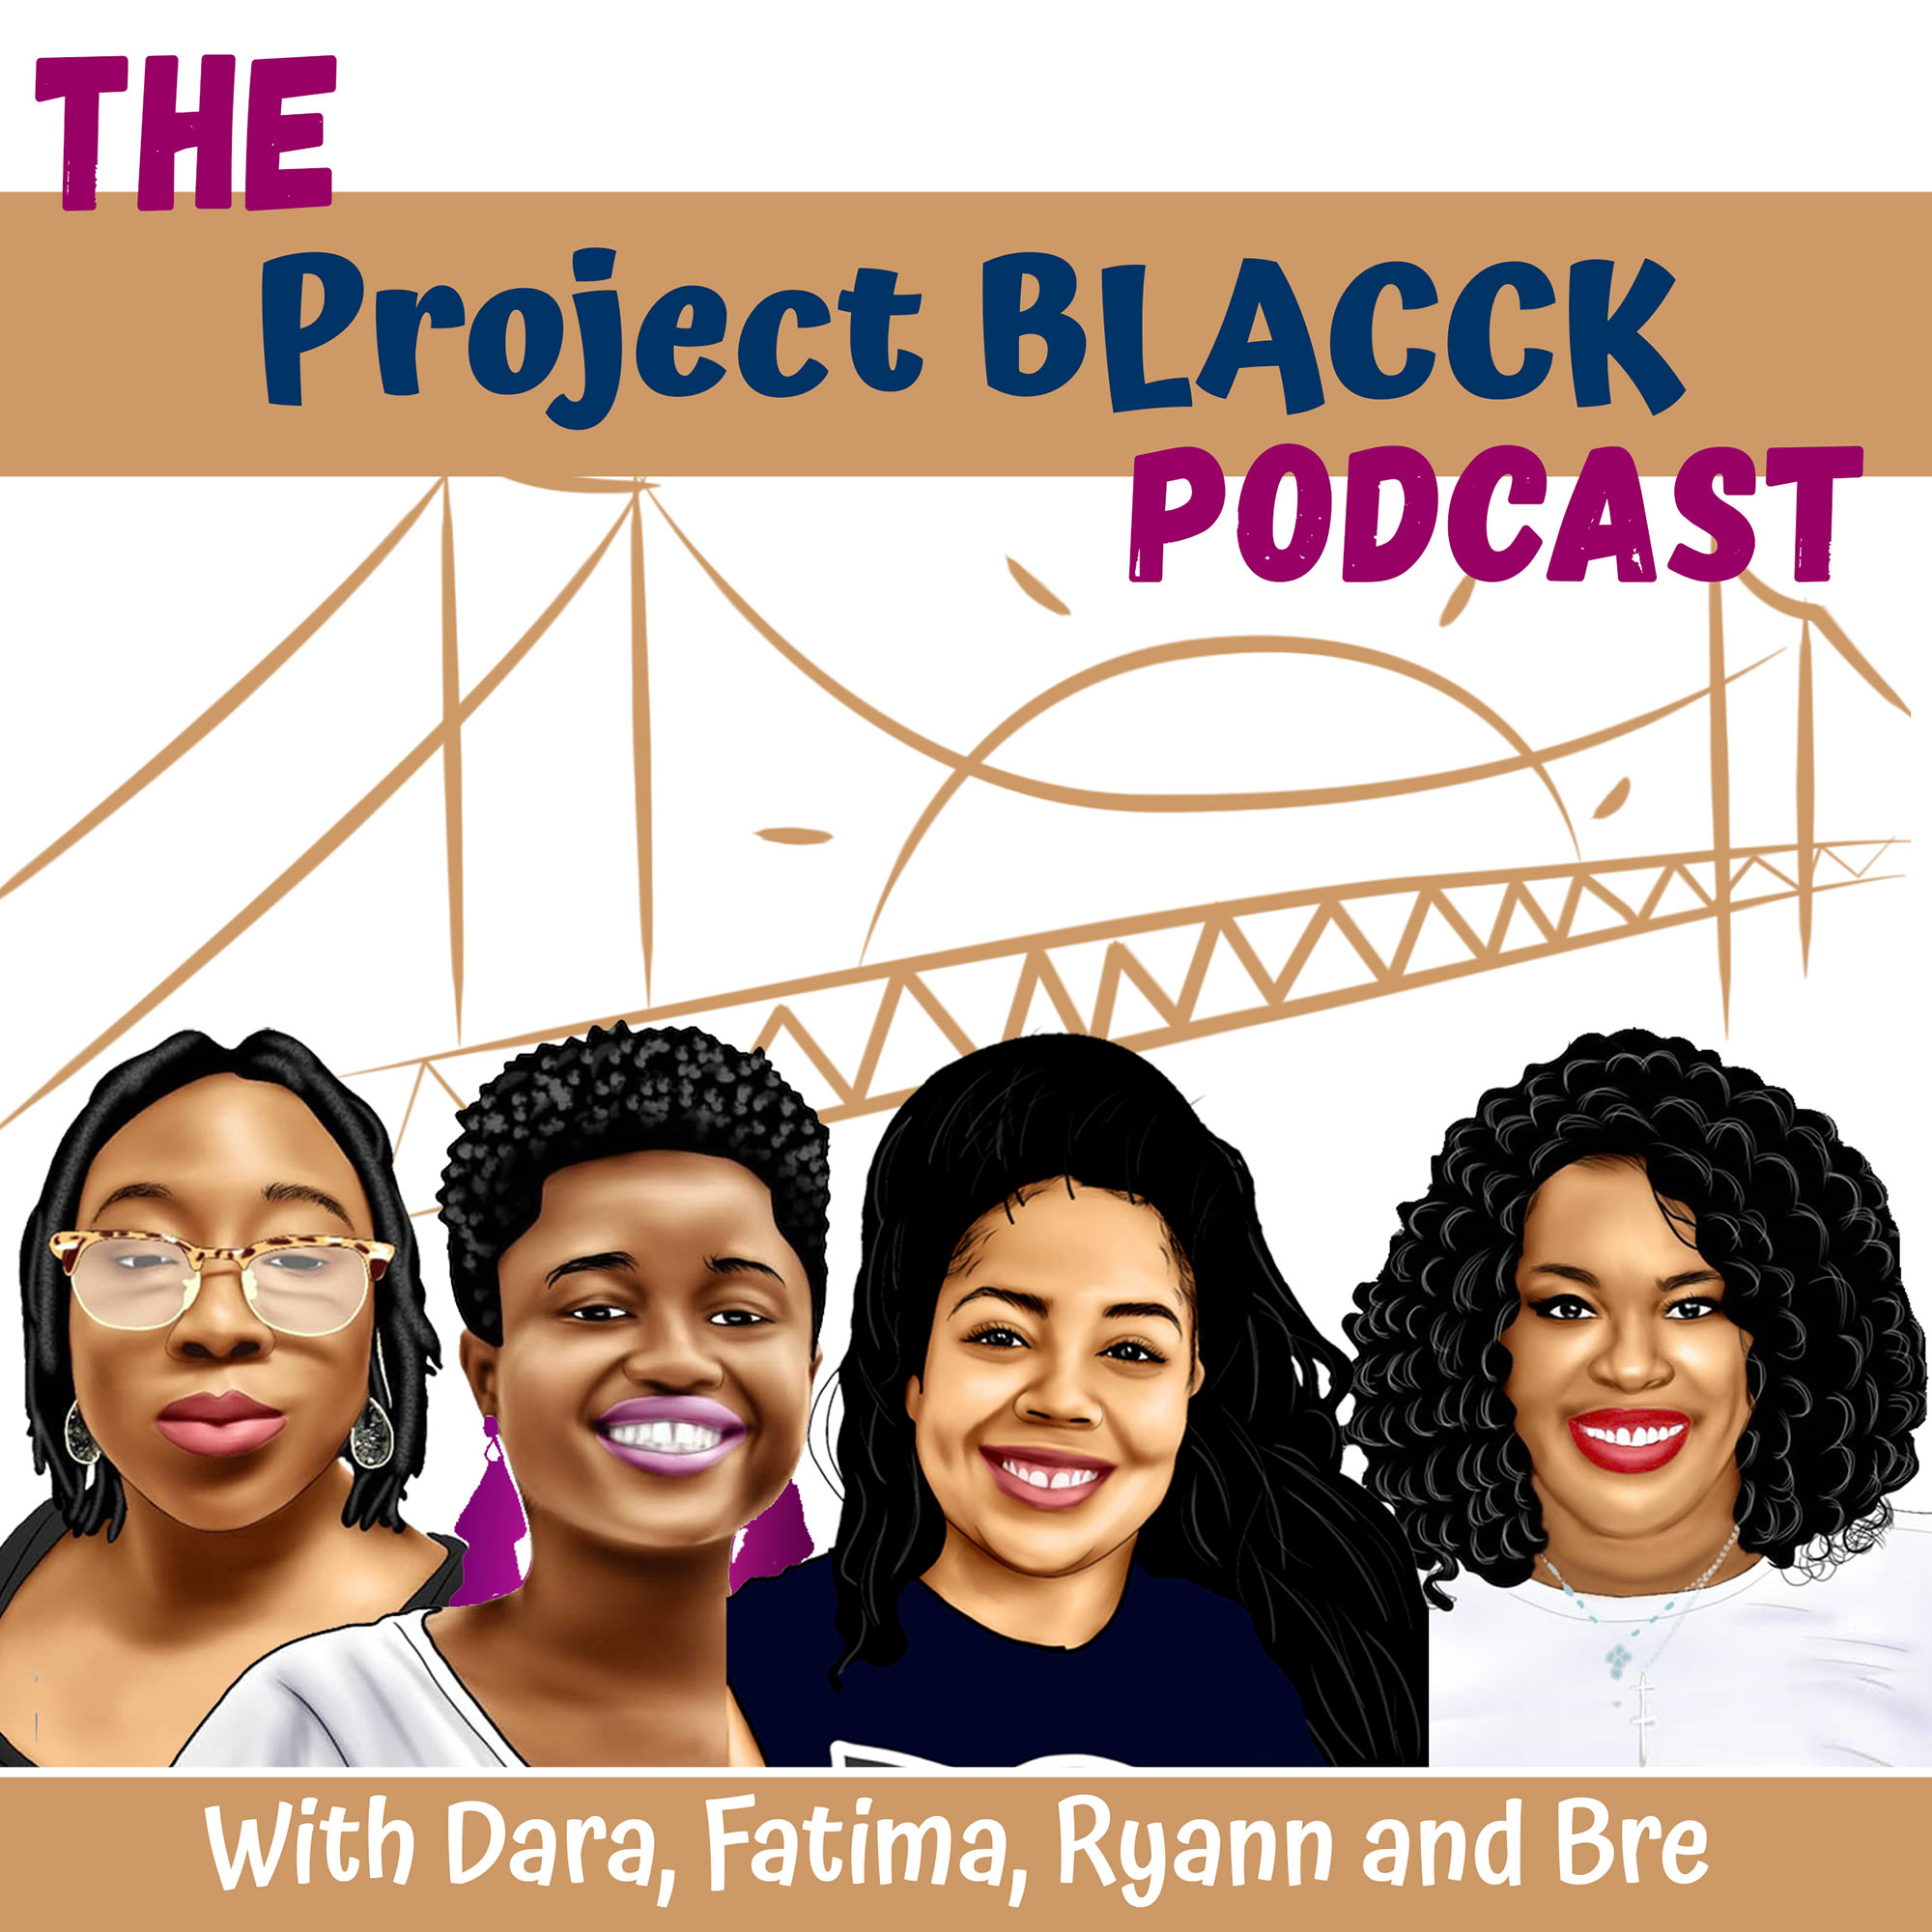 Illustrated logo for "the Project Black Podcast." The illustration in tan shows a sign rising over a bridge and then four illustrated portraits of the hosts Dara, Fatima, Ryann and Bre.